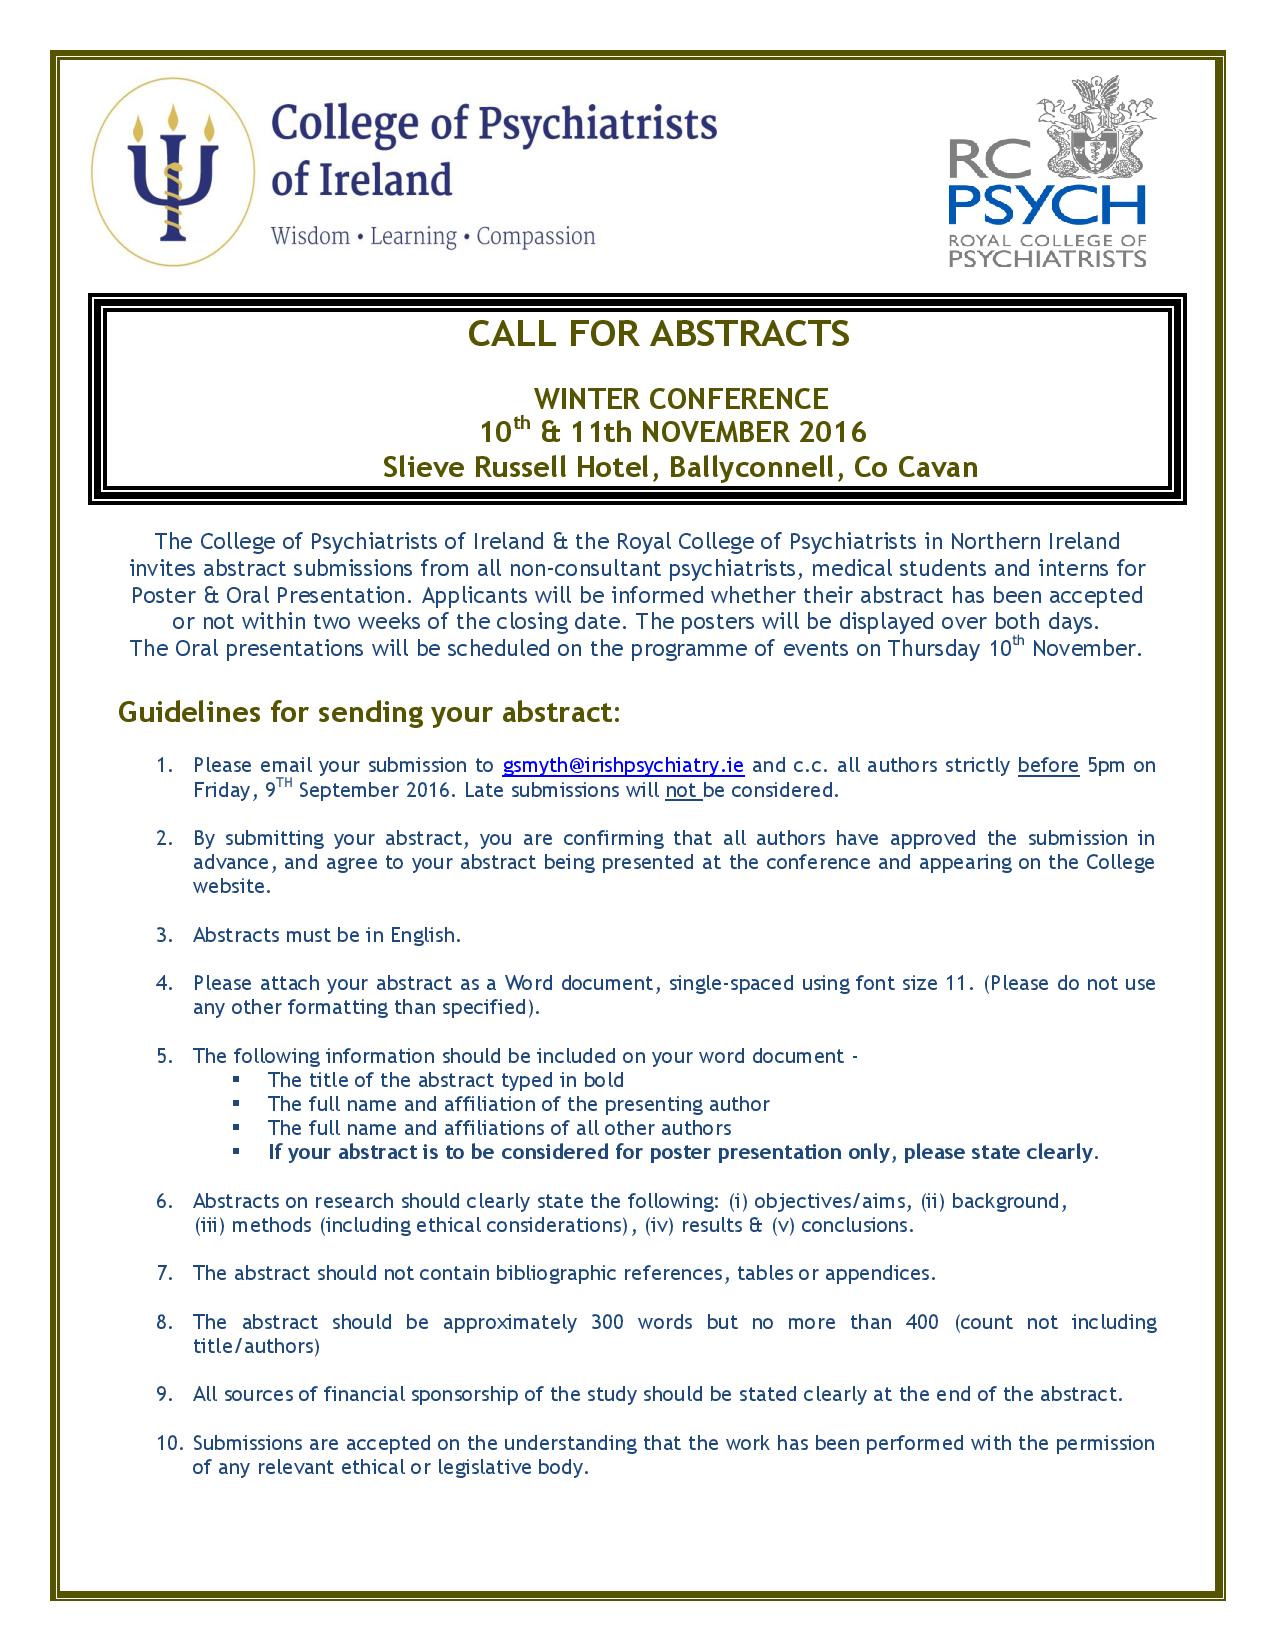 Call for Abstracts Poster